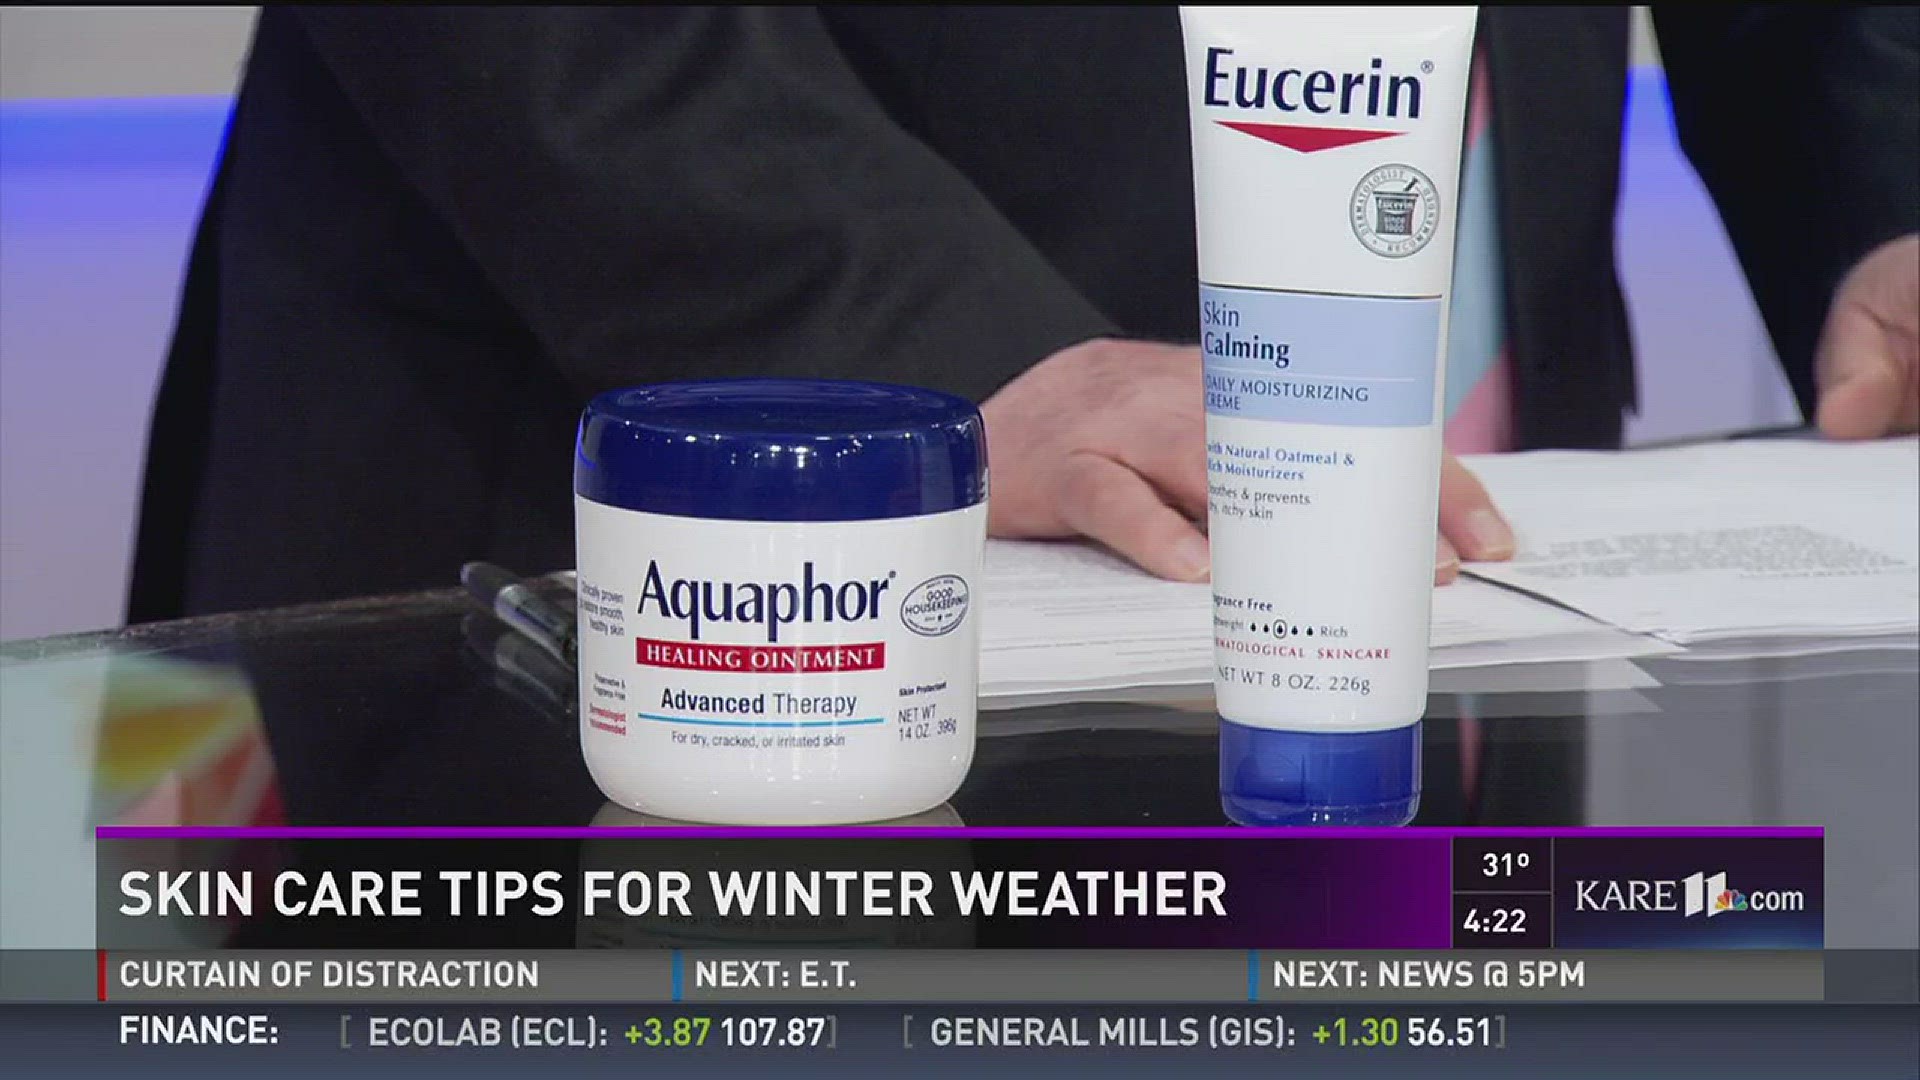 Skin care tips for winter weather